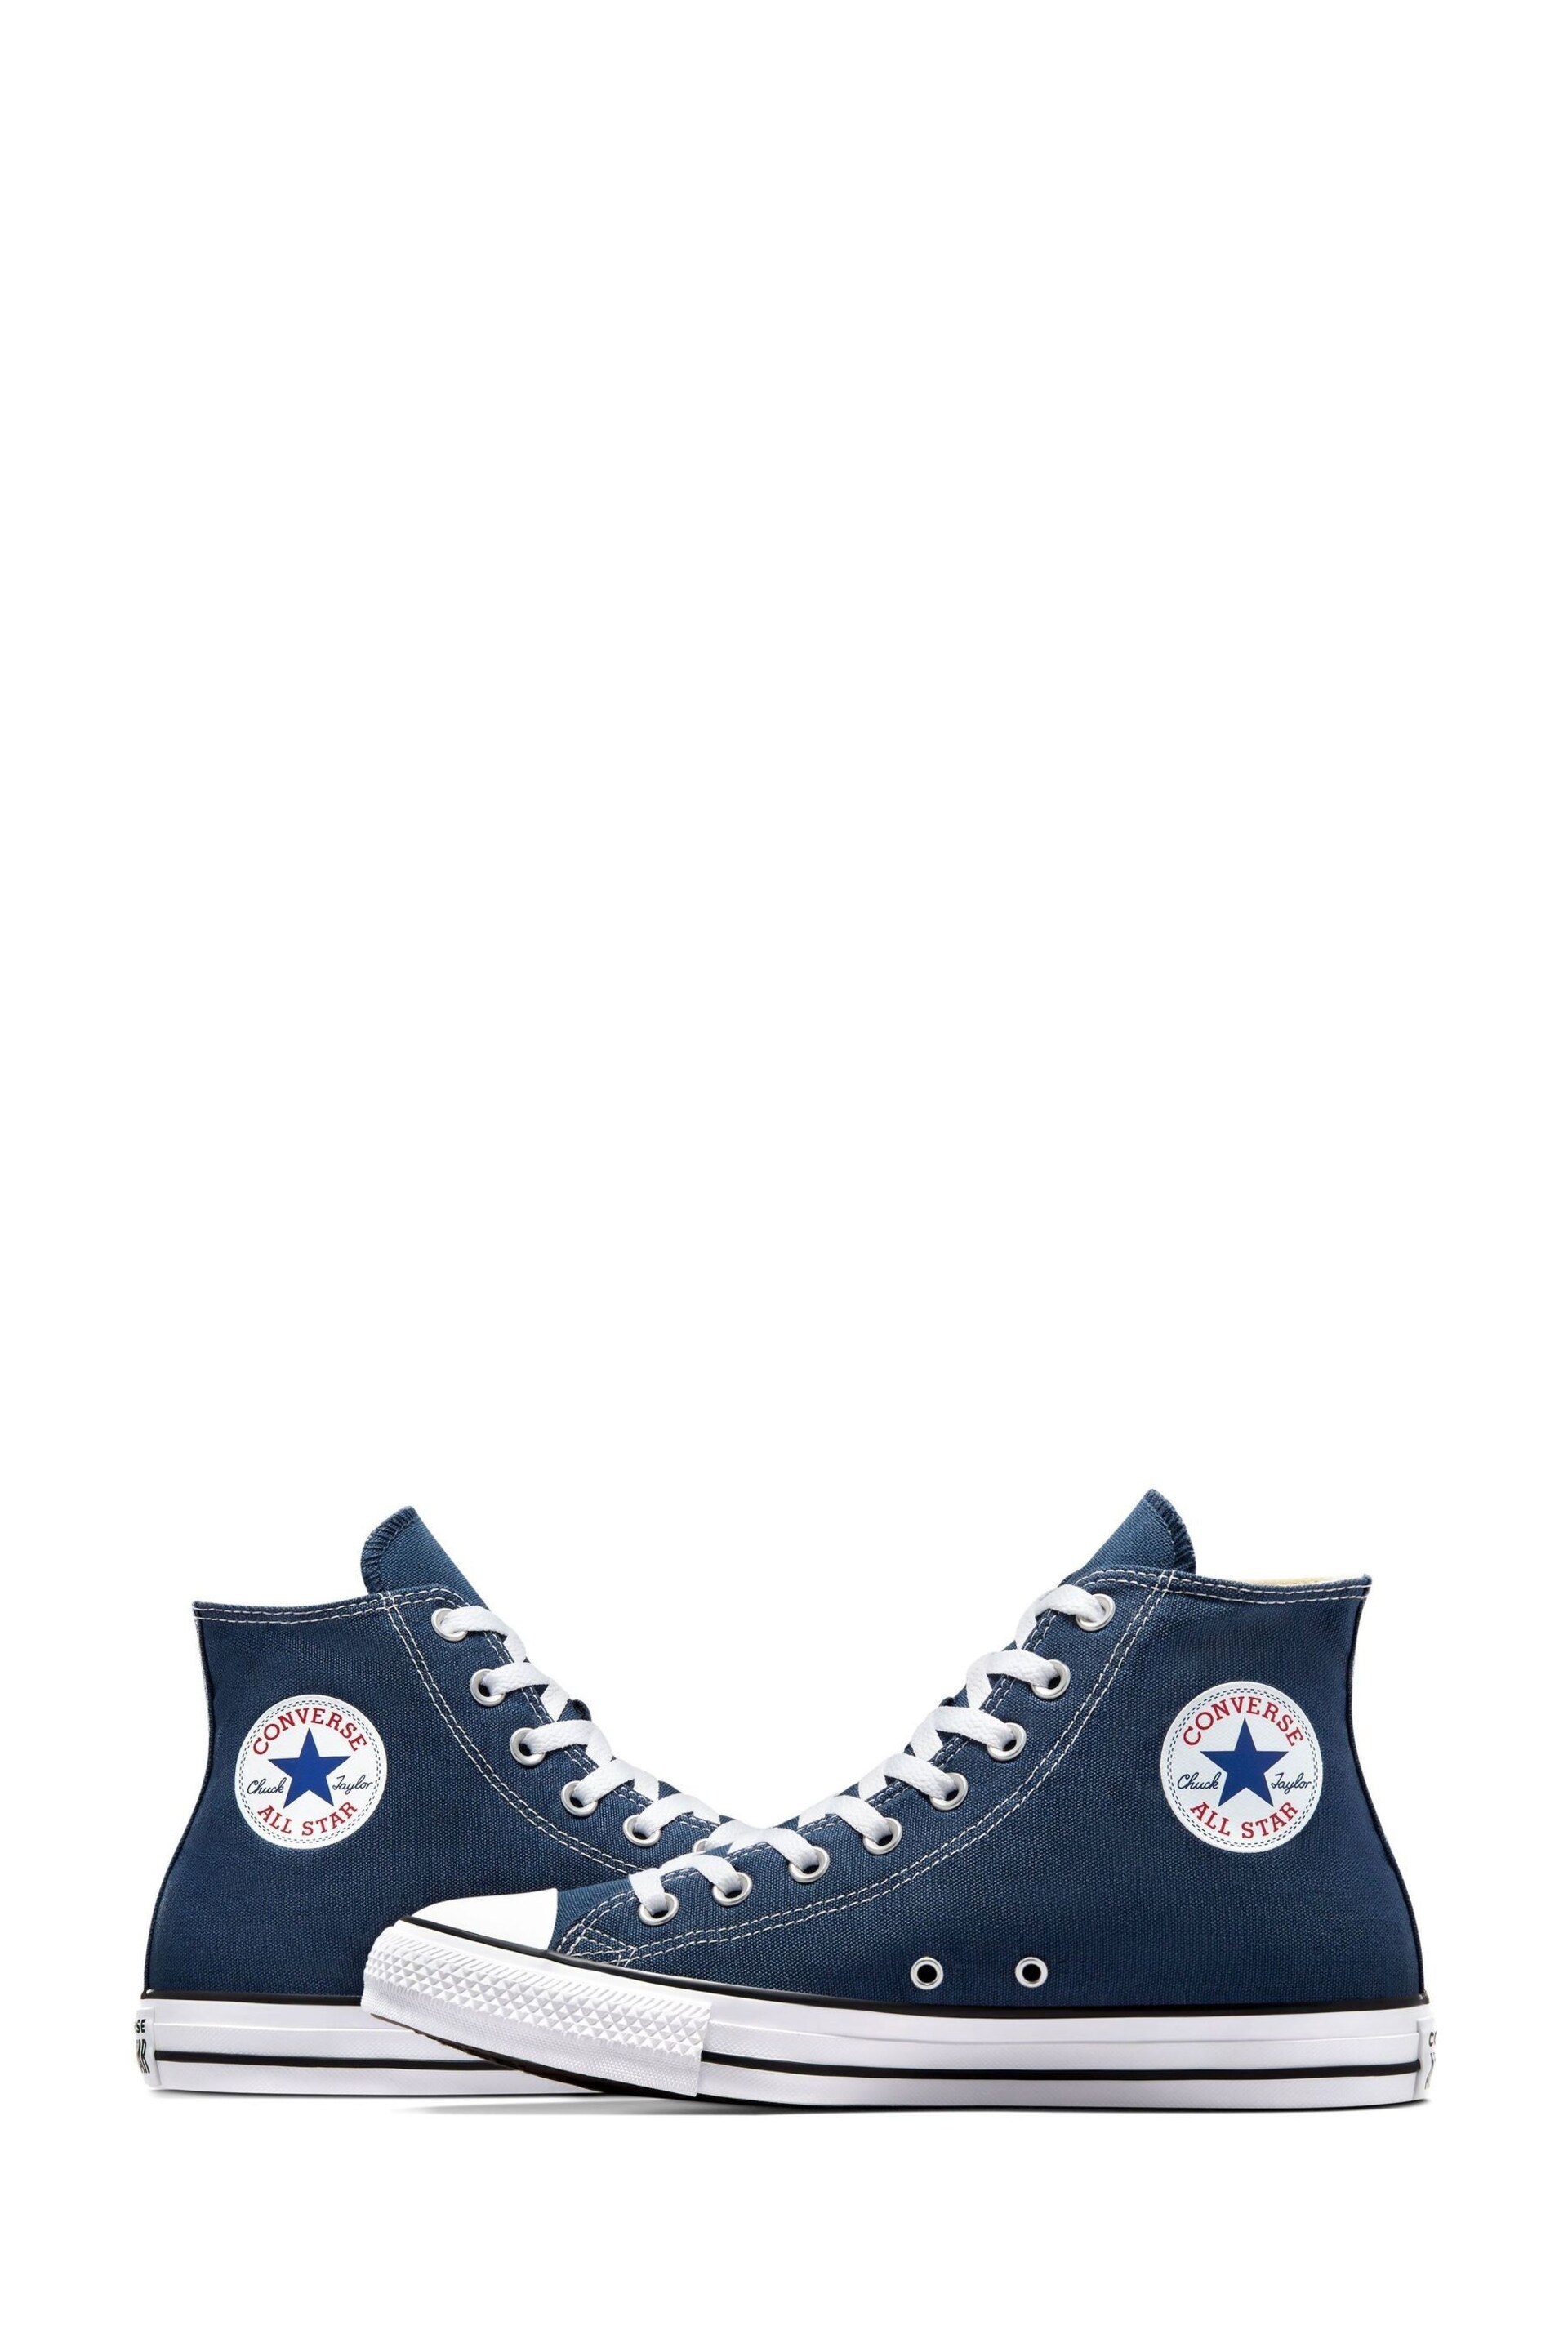 Converse Navy Regular Fit Chuck Taylor All Star High Trainers - Image 10 of 11